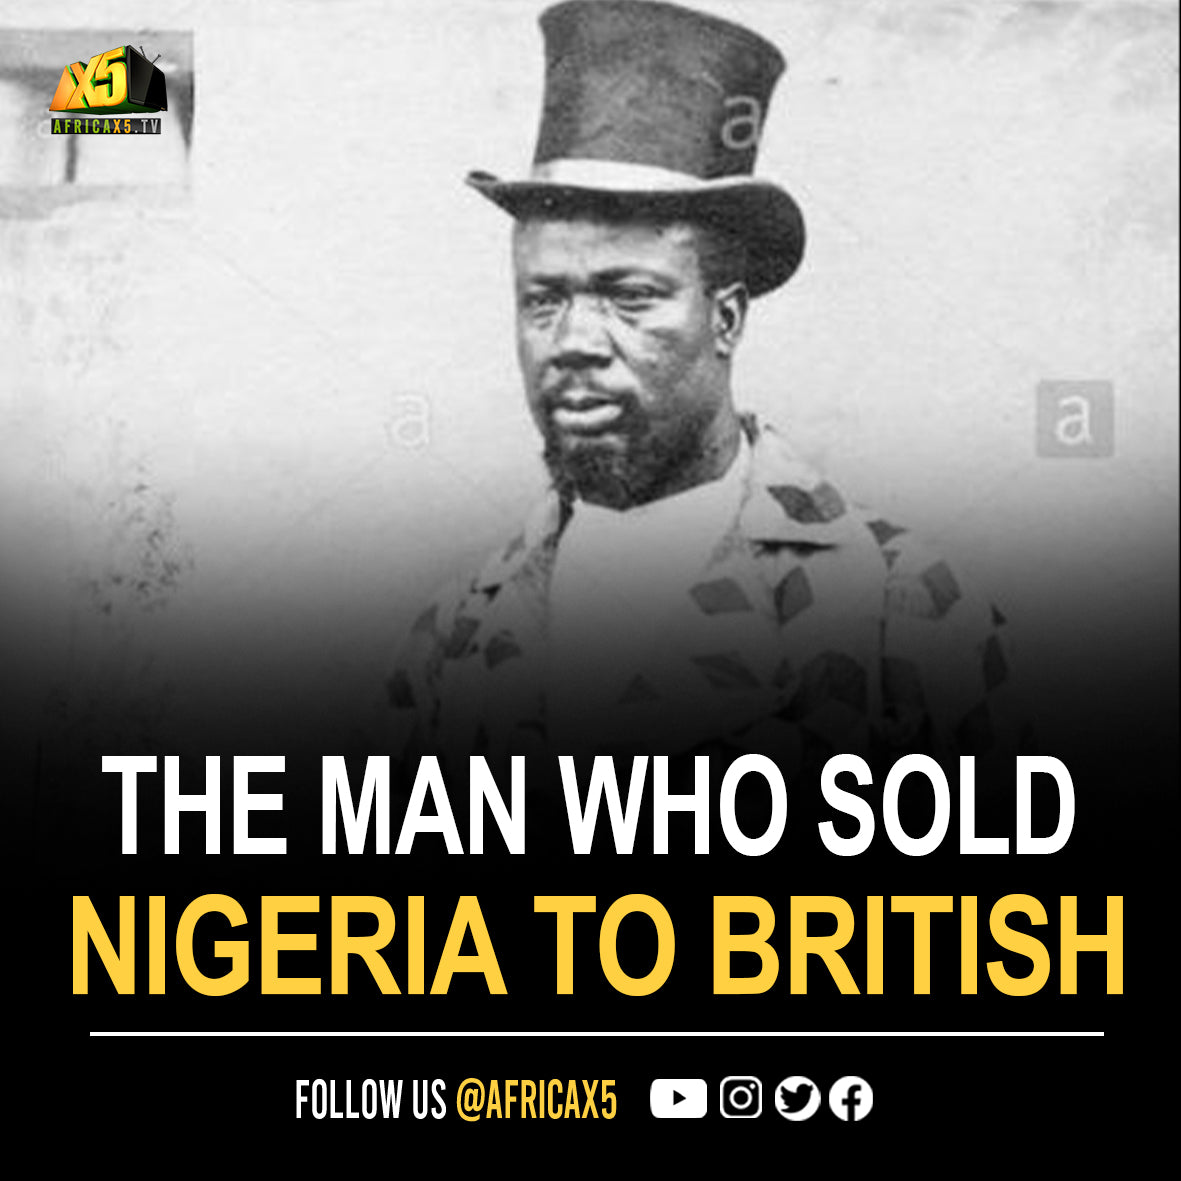 STORY OF THE MAN WHO SOLD WHAT IS NOW NIGERIA TO THE BRITISH FOR £865K (pounds) IN 1899